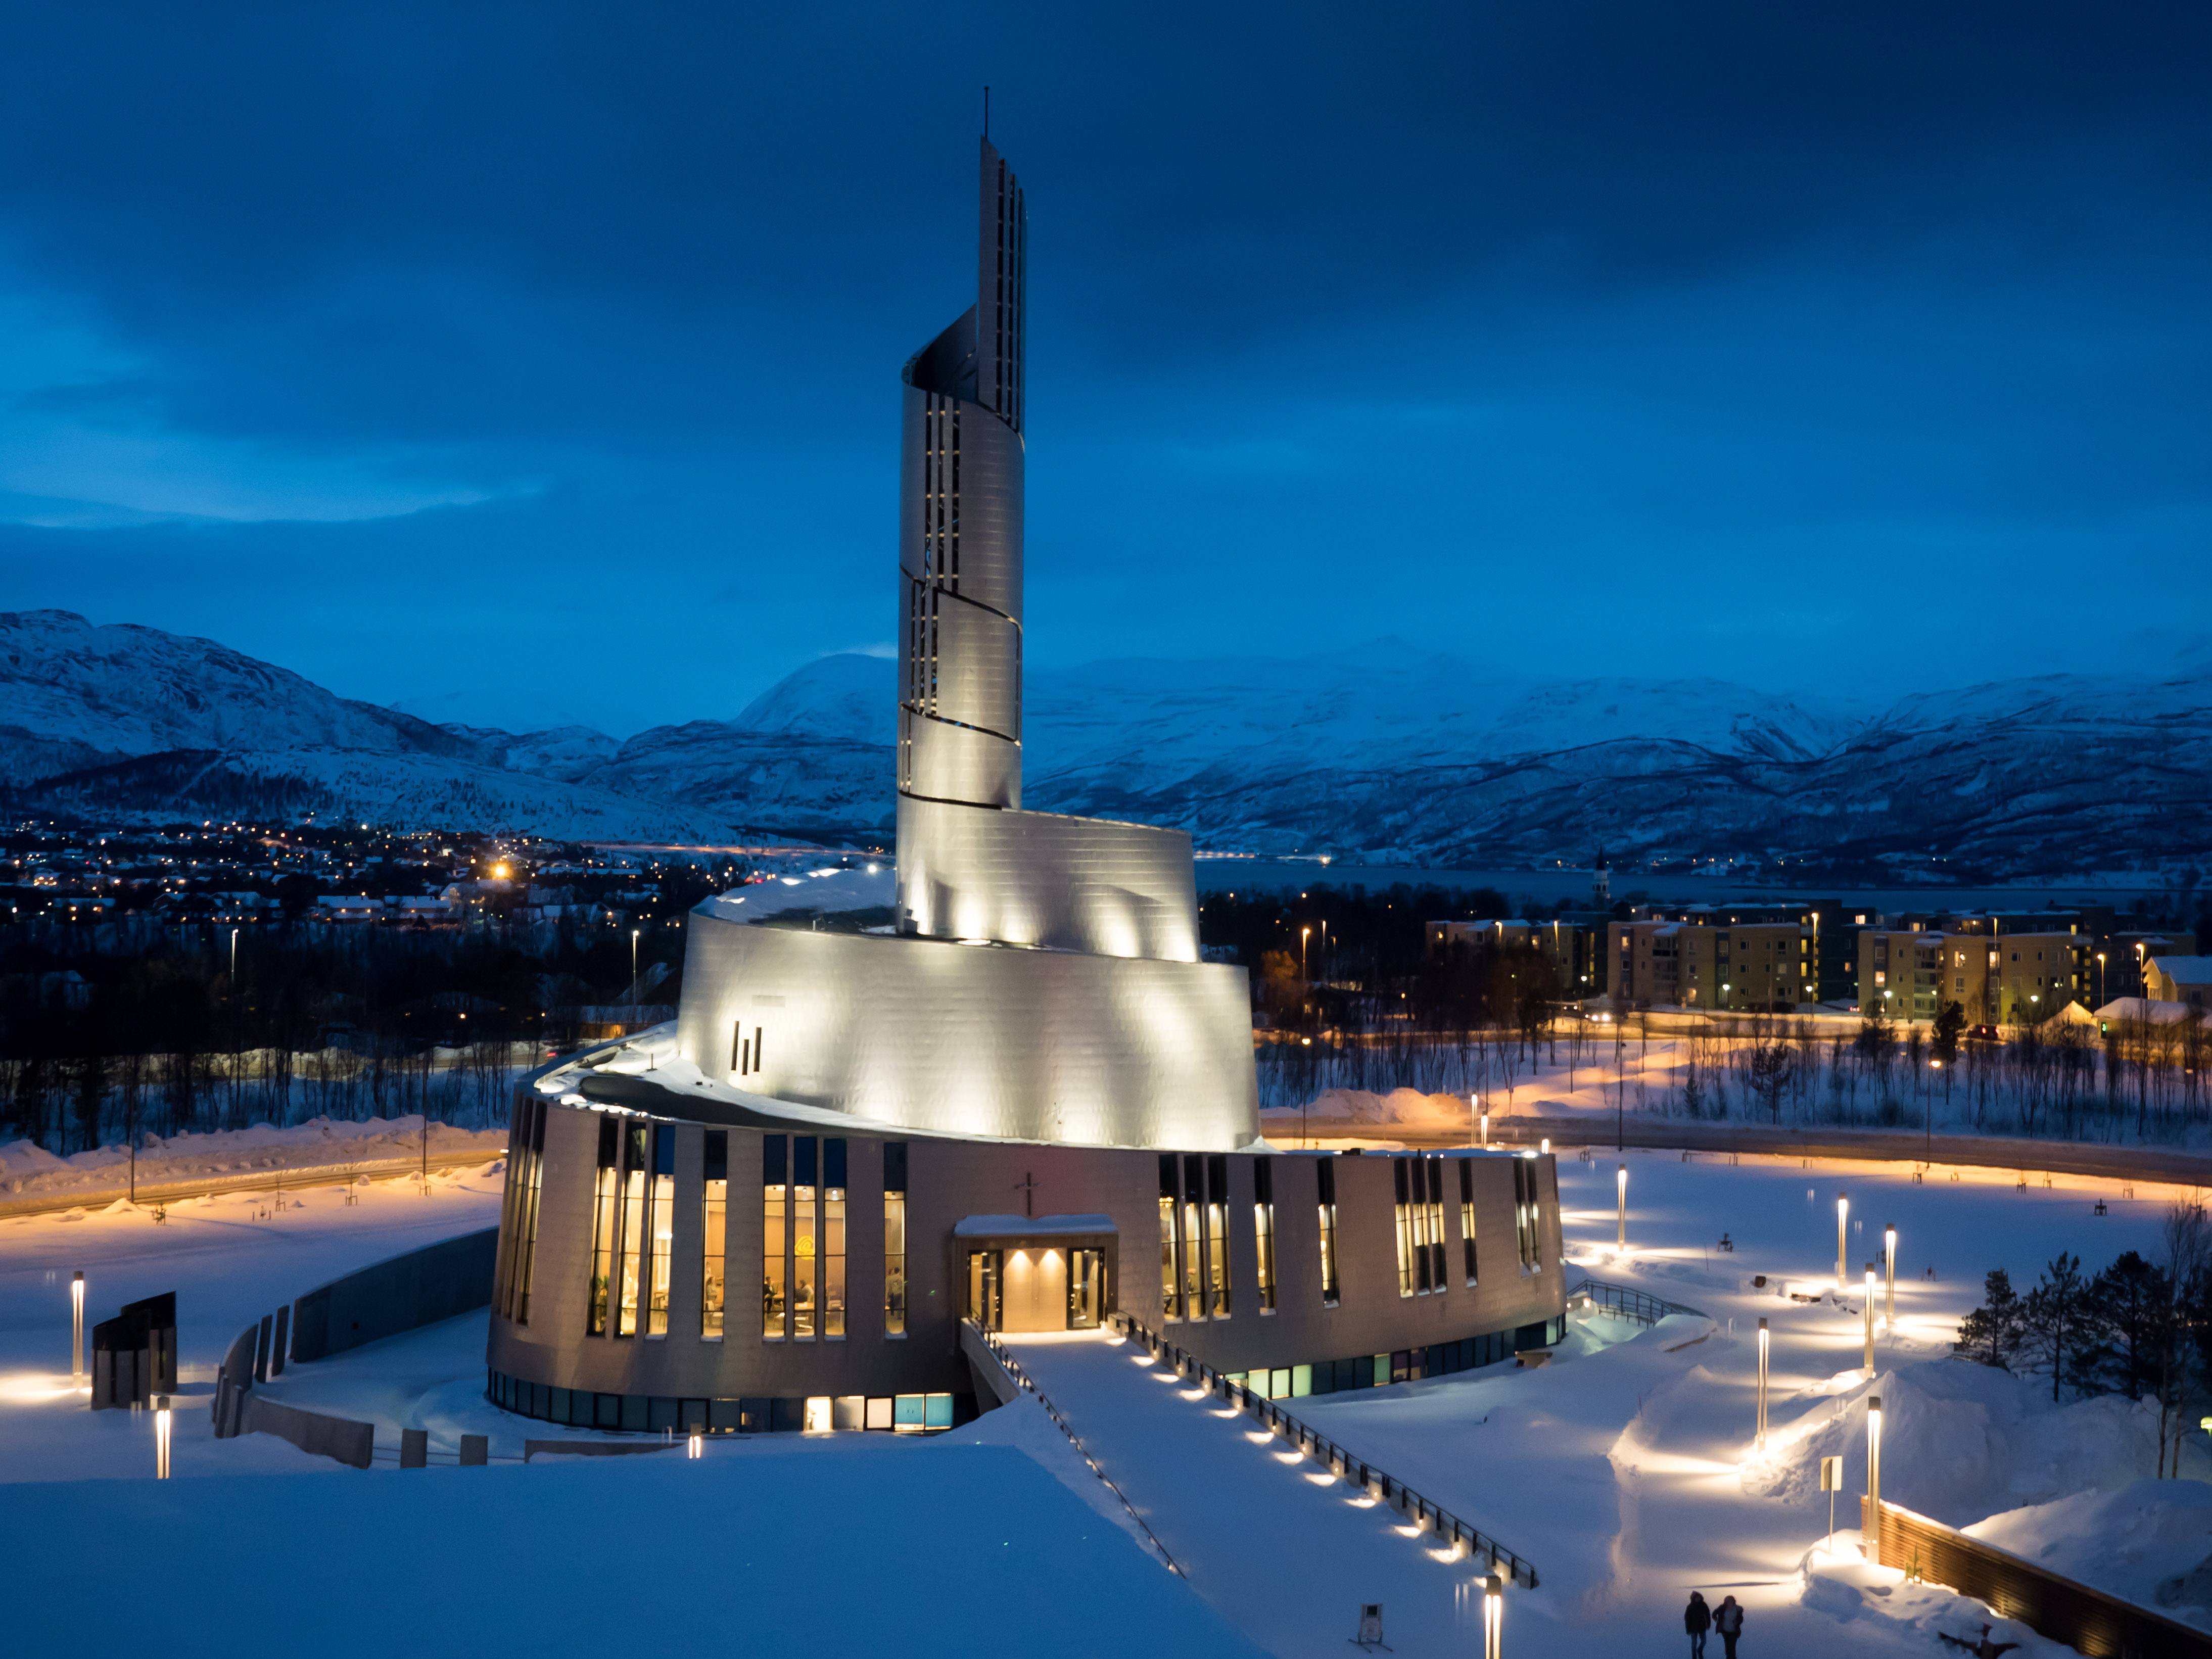 Northern Lights Cathedral in Alta, Norway